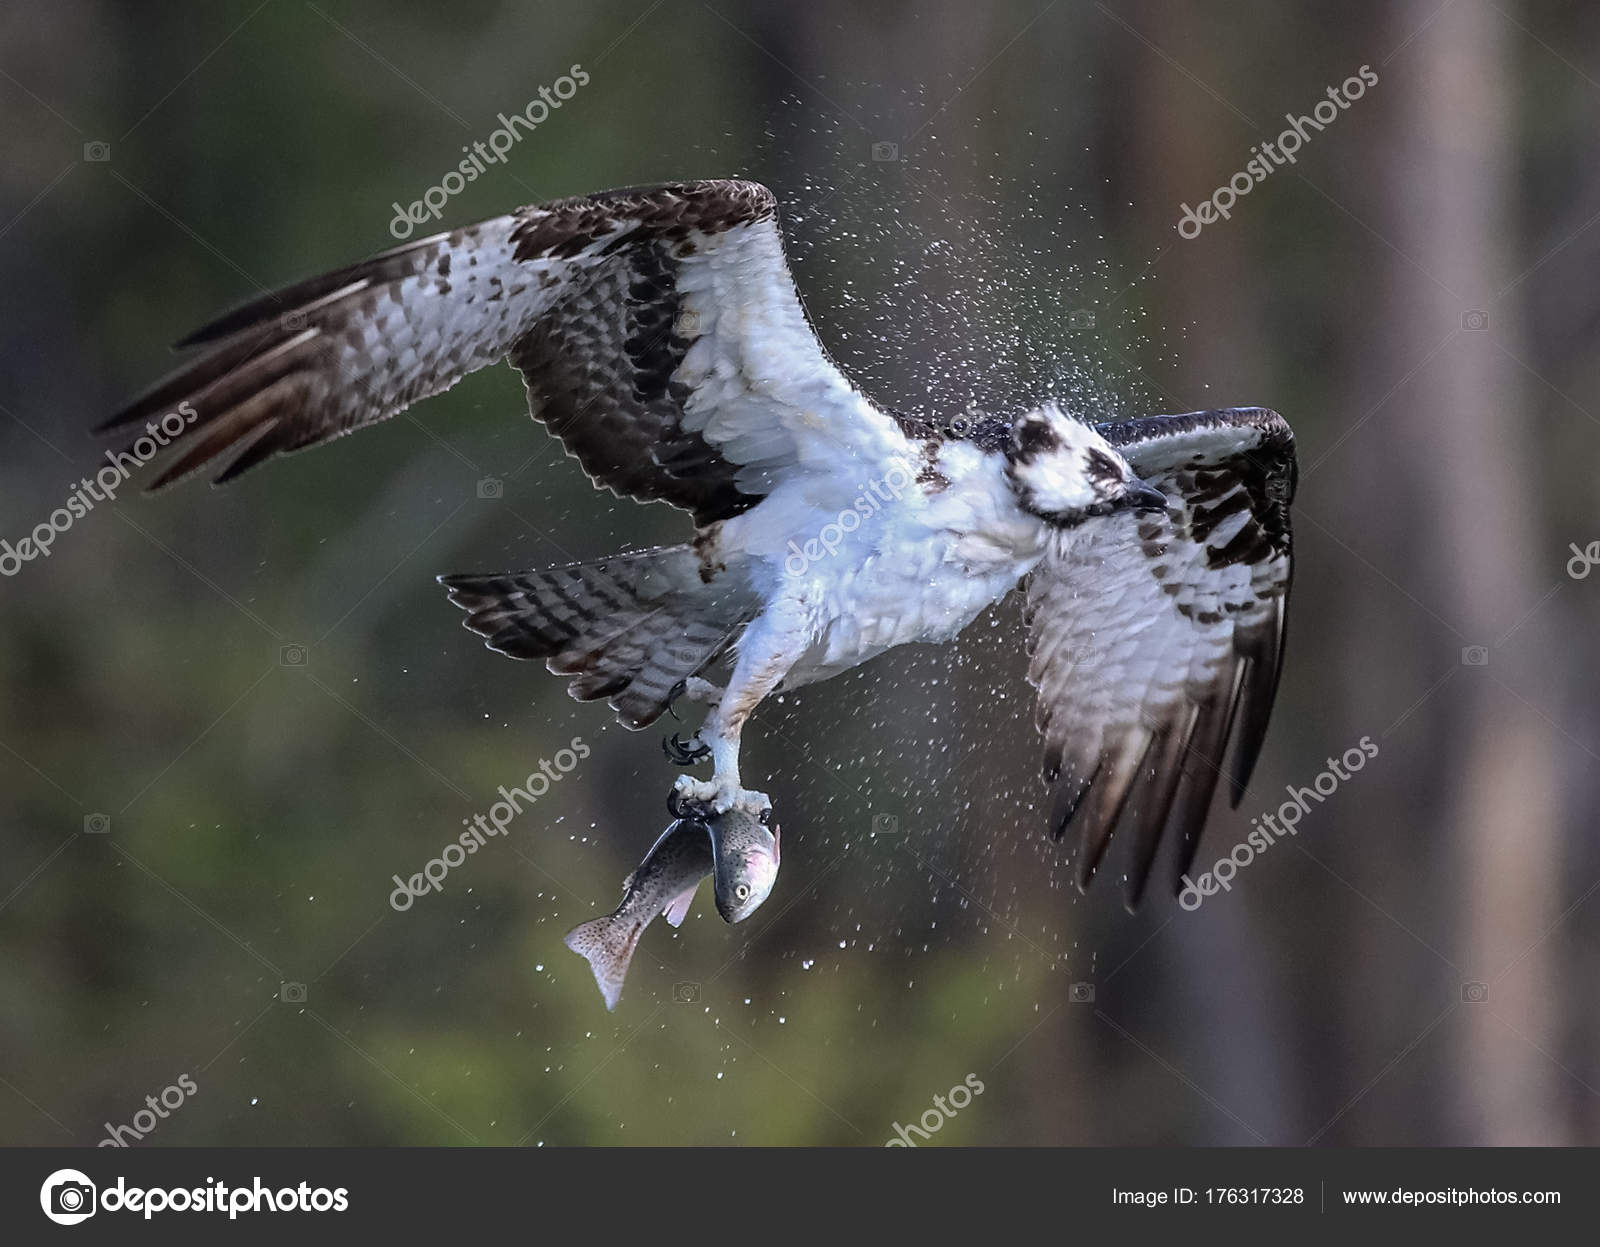 osprey hunting for fish — Stock Photo © graphicphoto #176317328